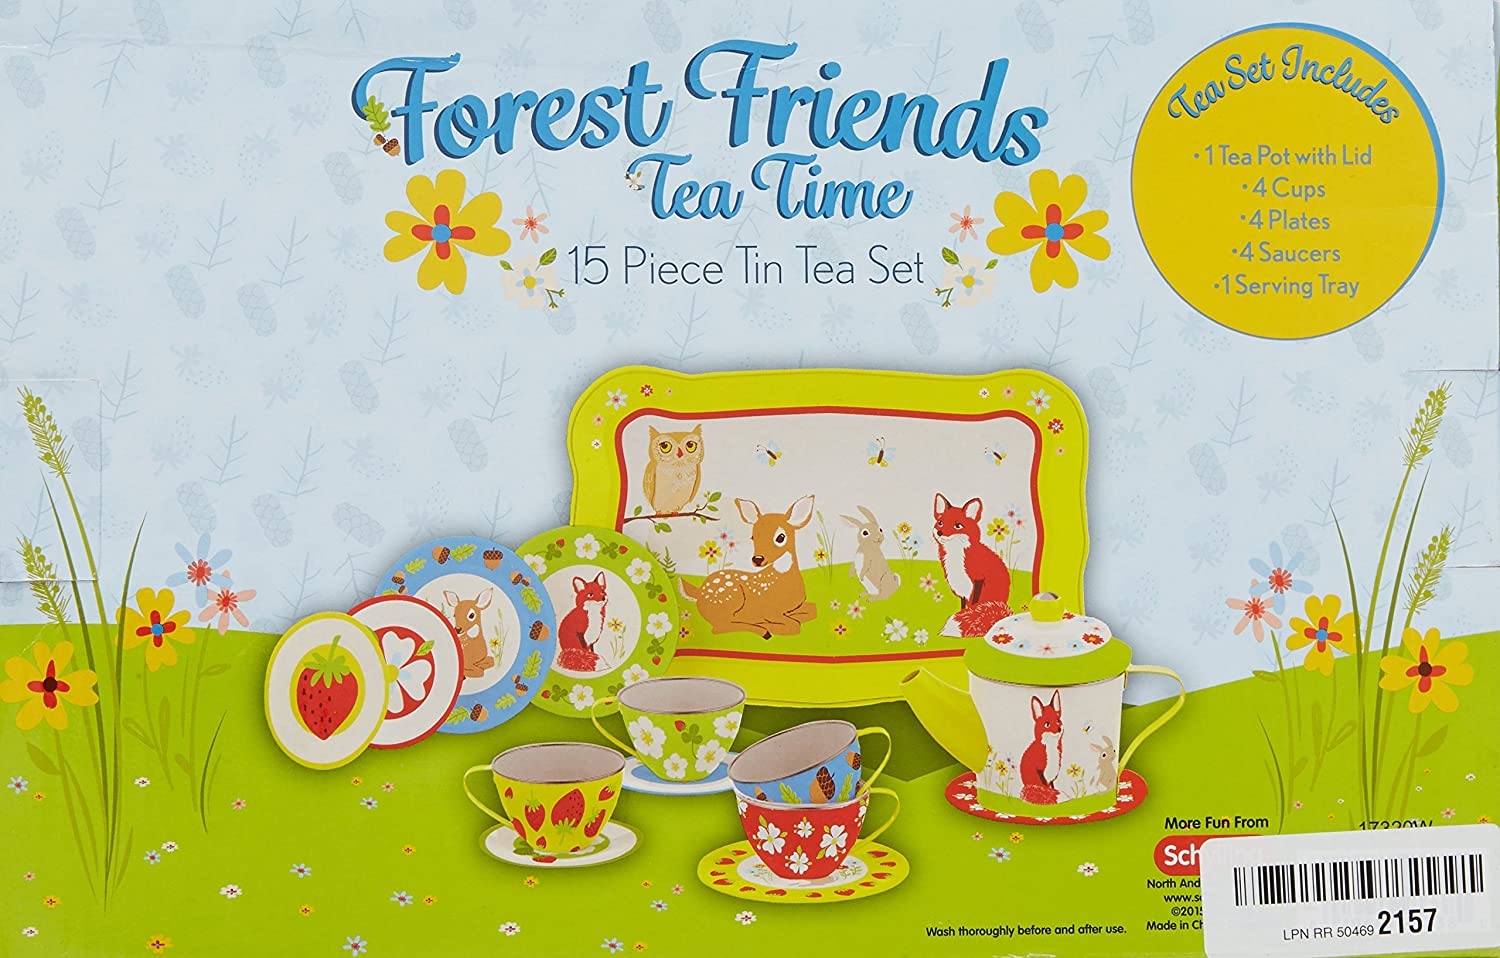 Schylling Forest Friends Tea Time